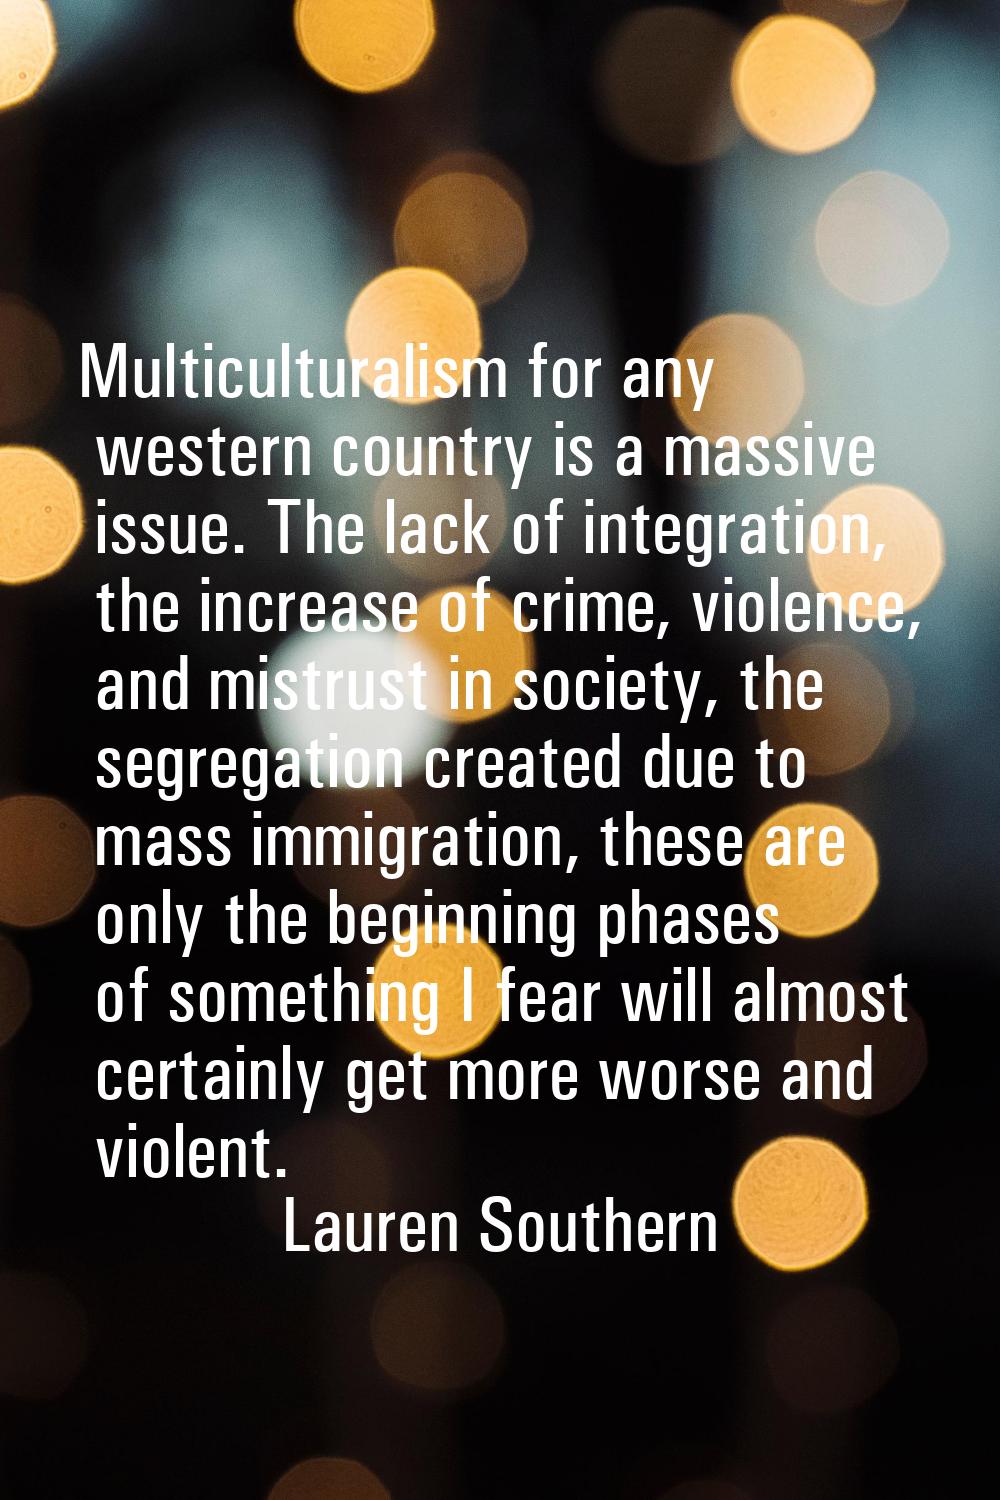 Multiculturalism for any western country is a massive issue. The lack of integration, the increase 